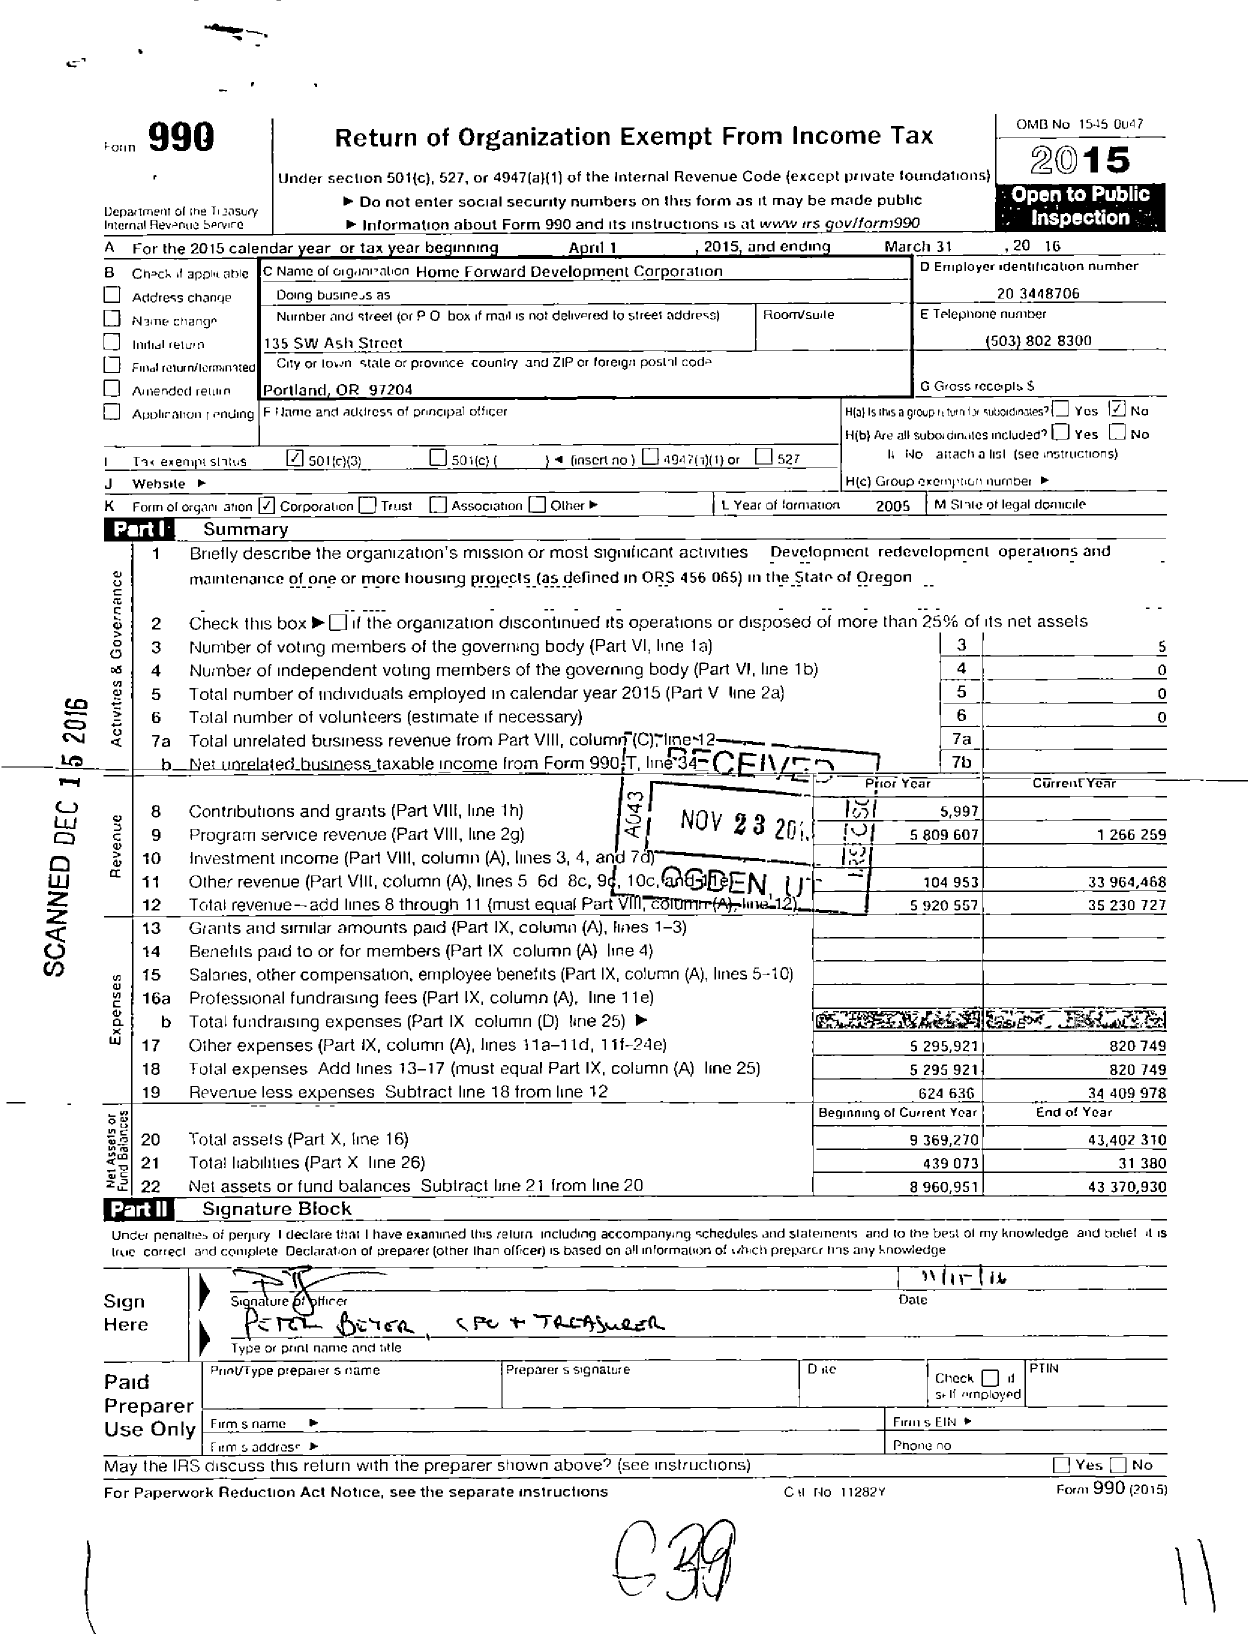 Image of first page of 2015 Form 990 for Home Forward Development Enterprises Corporation